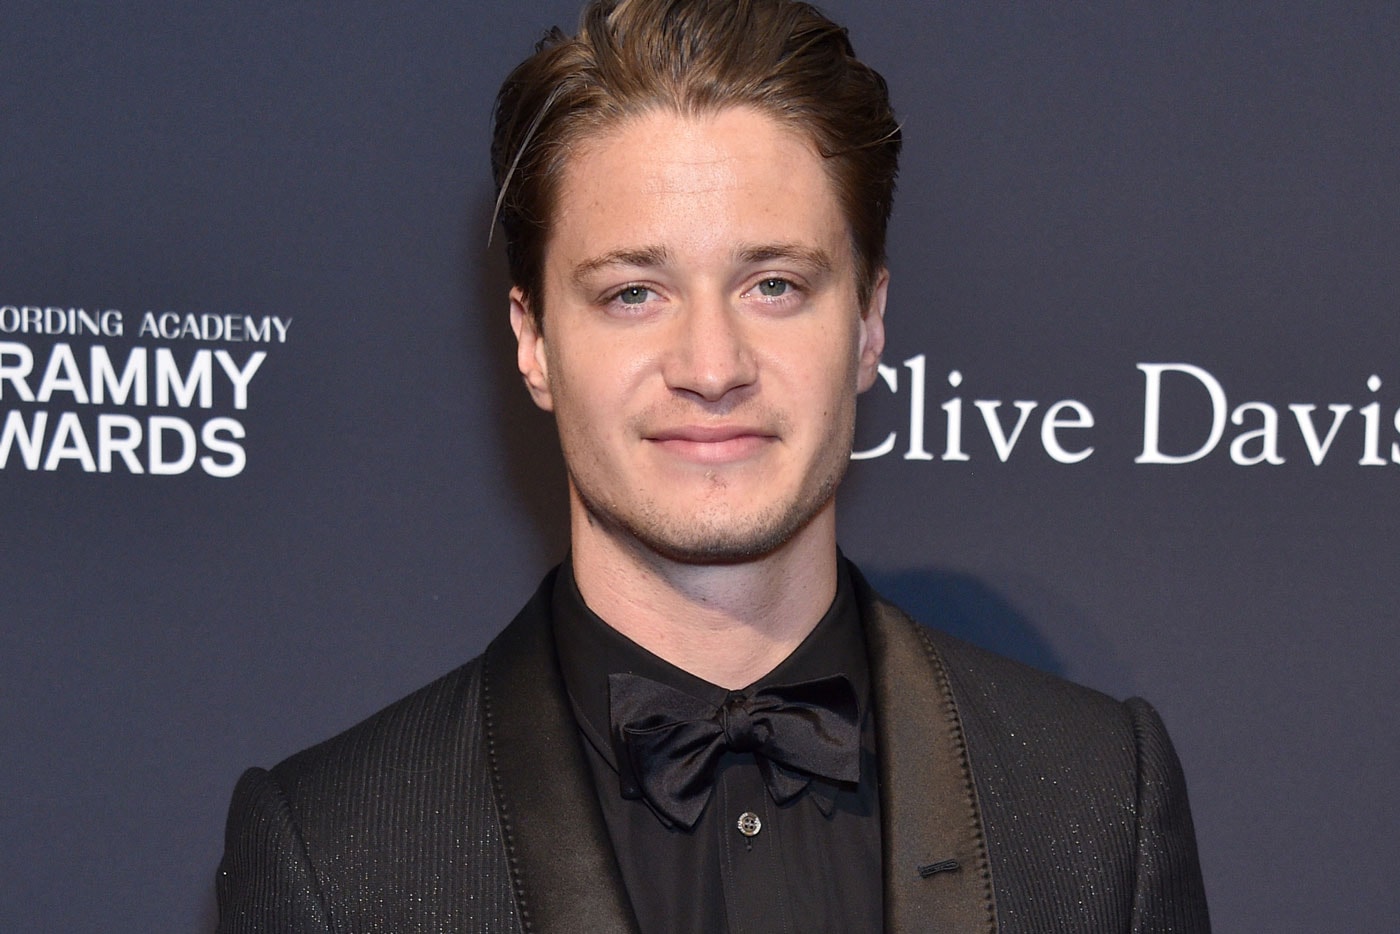 Kygo Sets New Record, Becomes Fastest Ever to Reach 1 Billion Streams on Spotify